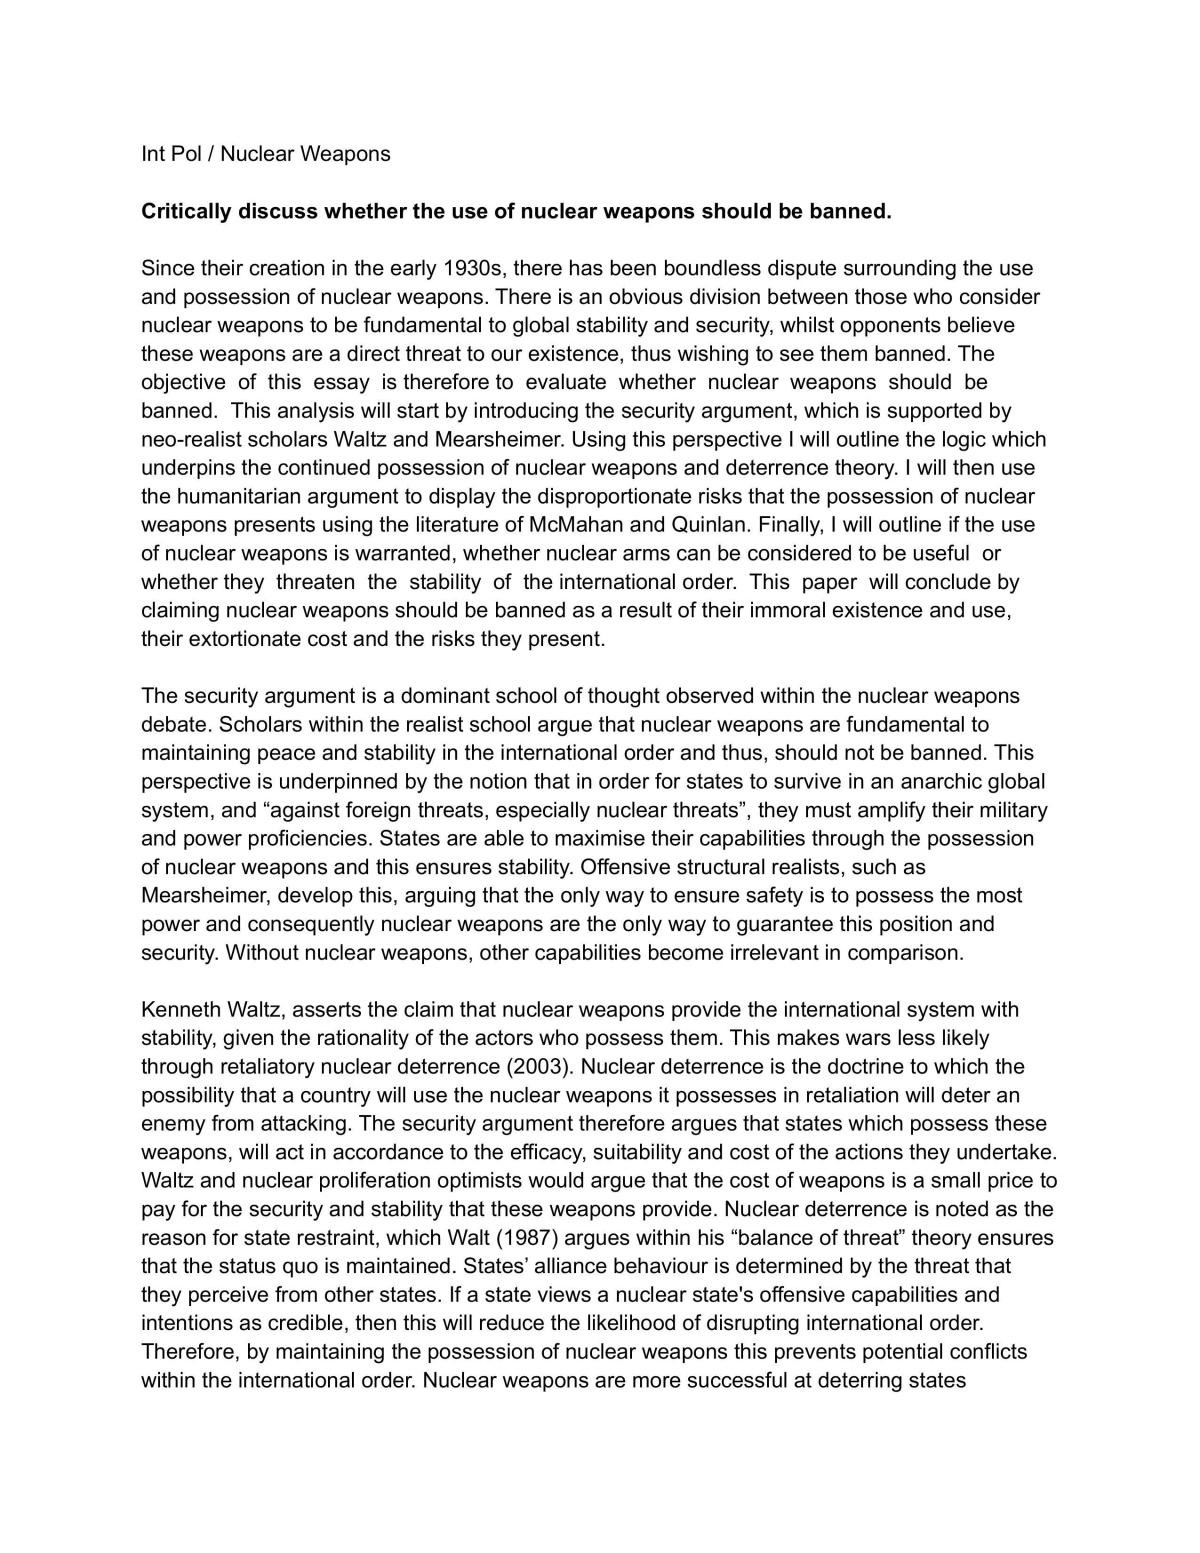 essay on nuclear attack